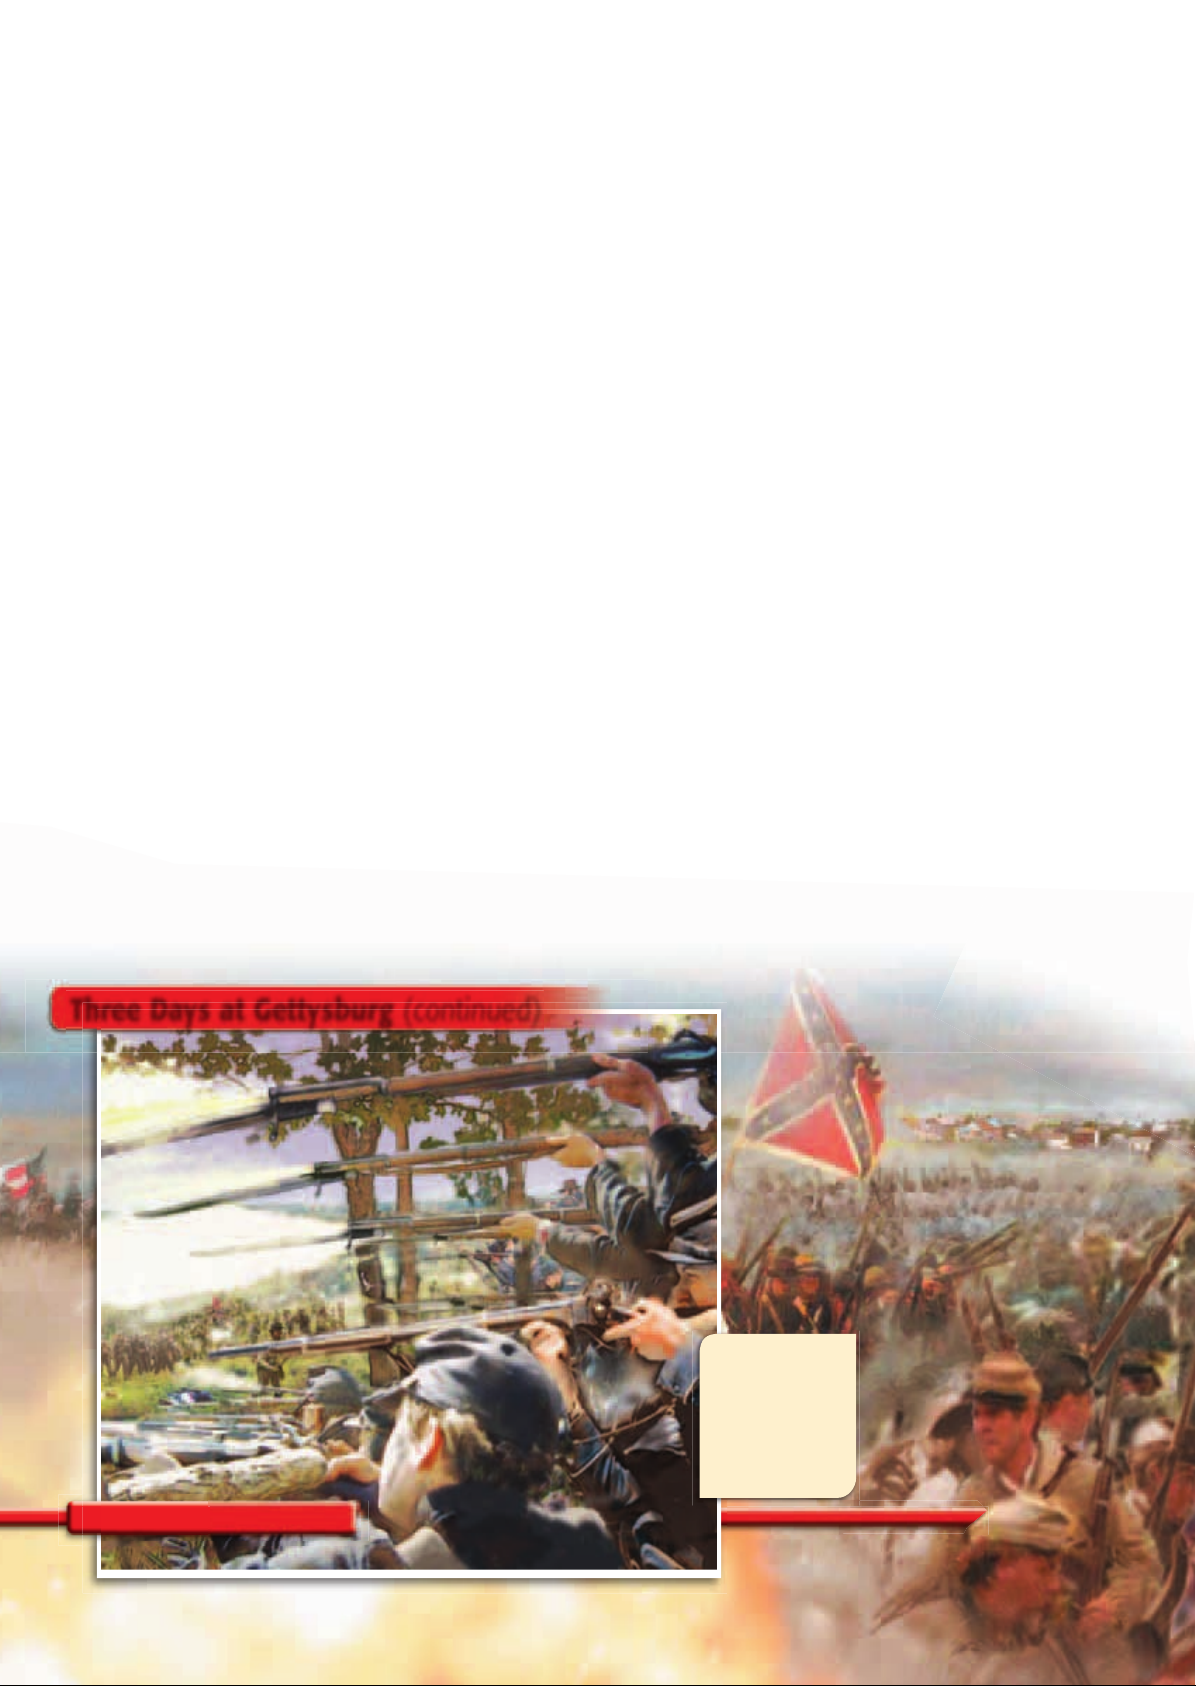 US_History_Textbook_8th_Grade_Chapter_15_The_Civil_War_h0BNFyV Image-28